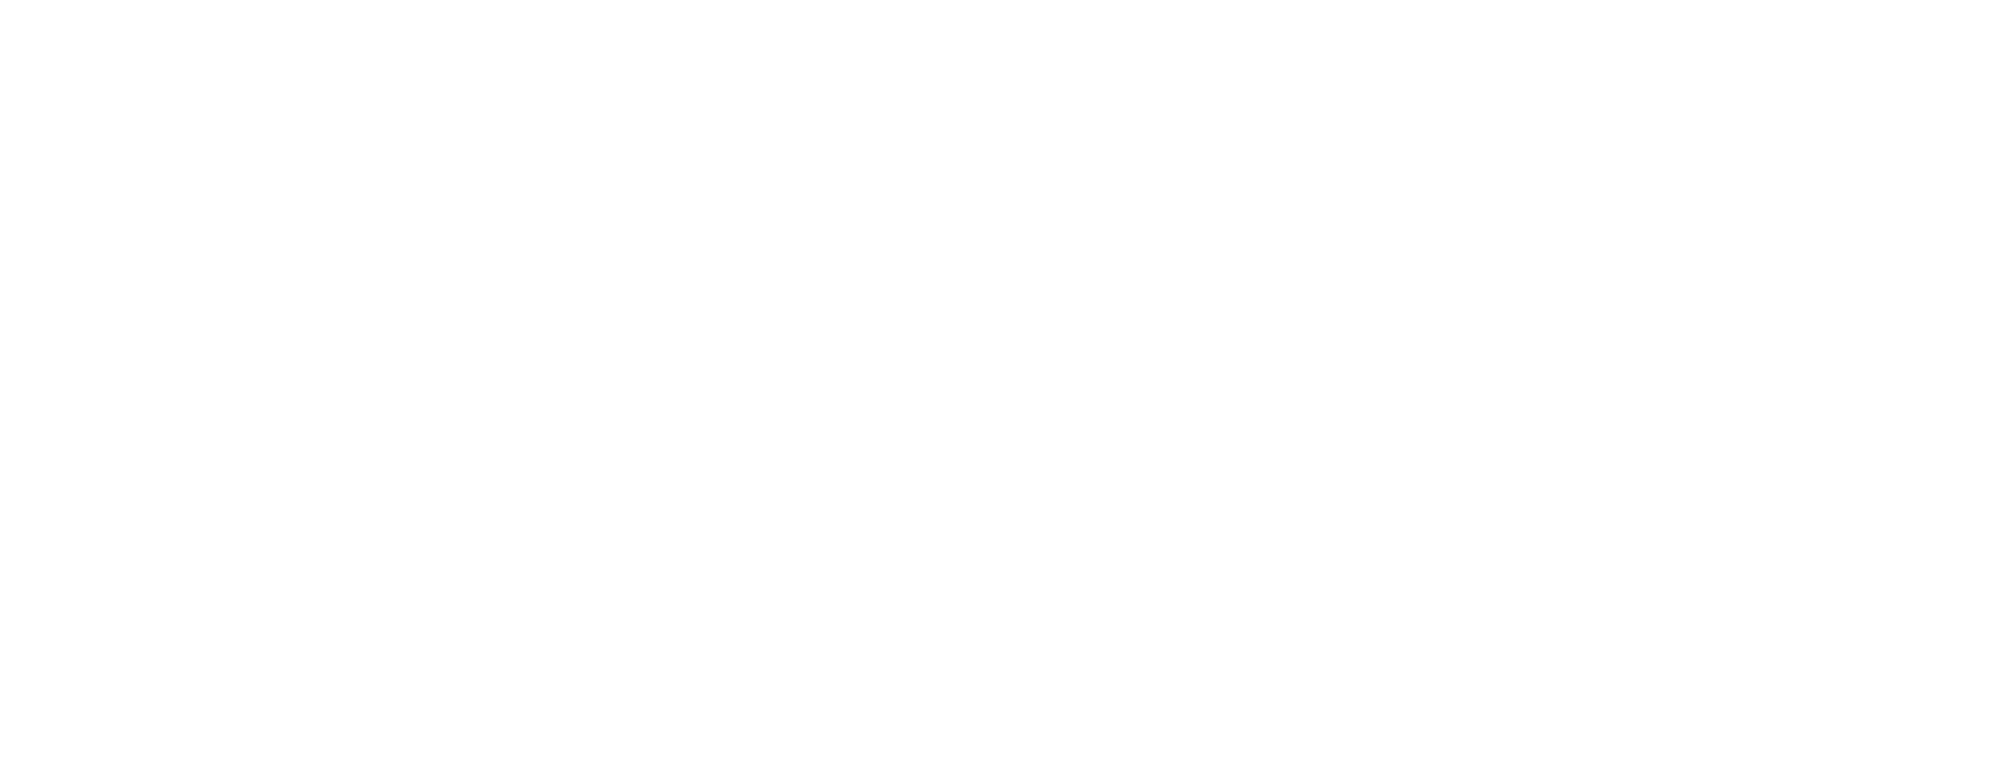 OpenFF Toolkit 0.11.1+0.ged6549eb.dirty documentation logo